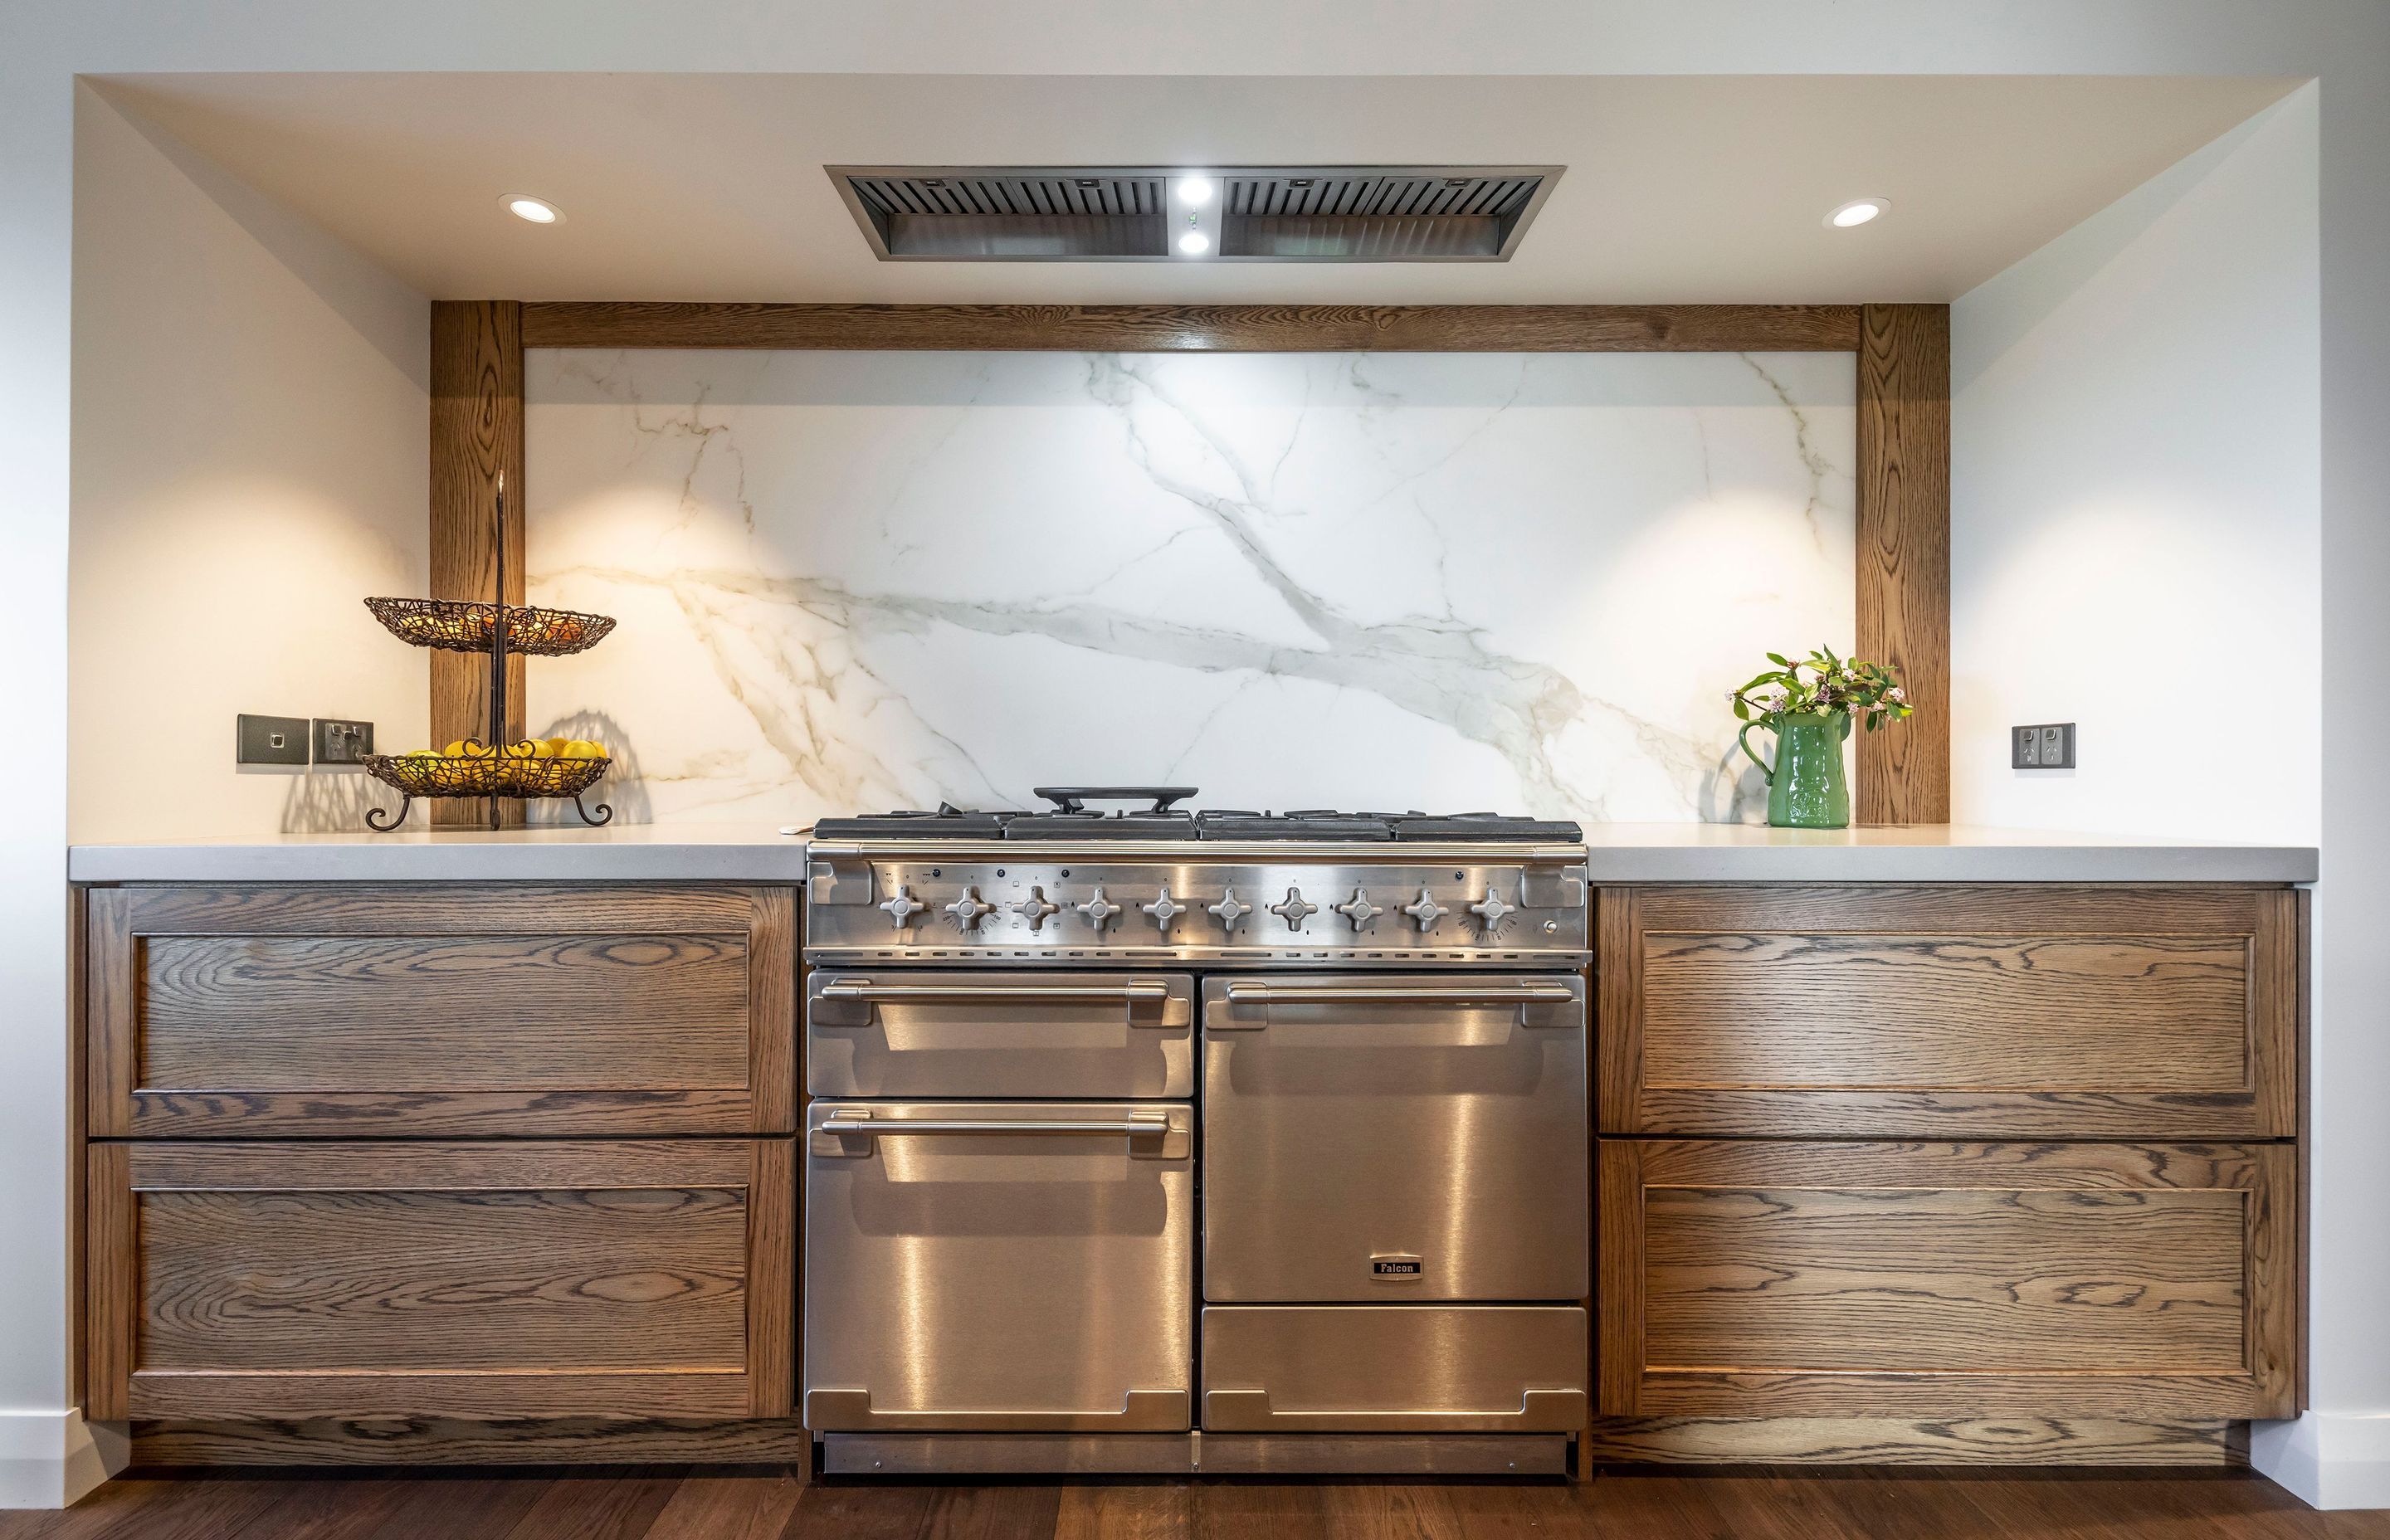 Natural materials sit side-by-side with industrial elements creating a sophisticated cooking zone in the kitchen.